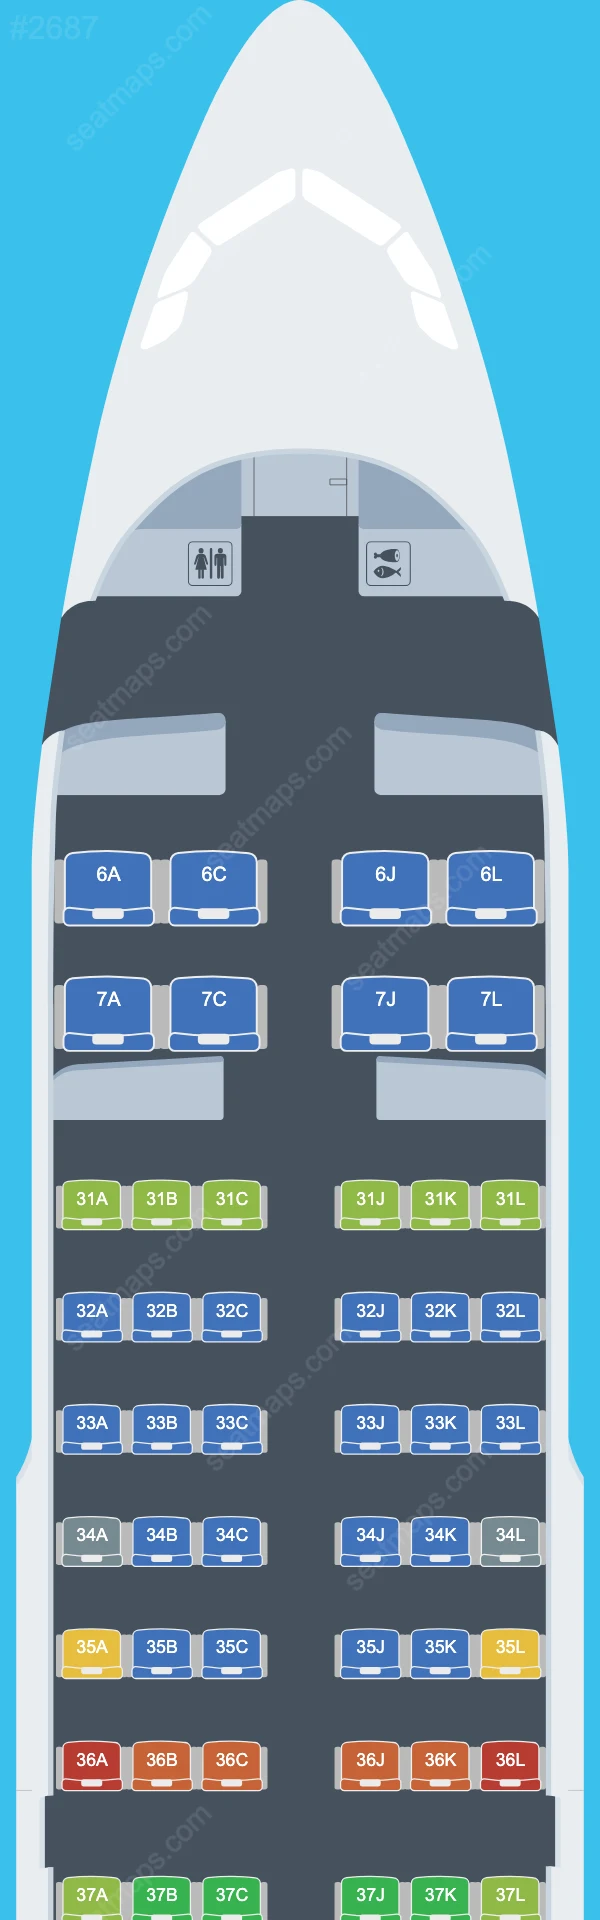 China Eastern Airbus A319 Seat Maps A319-100 V.1